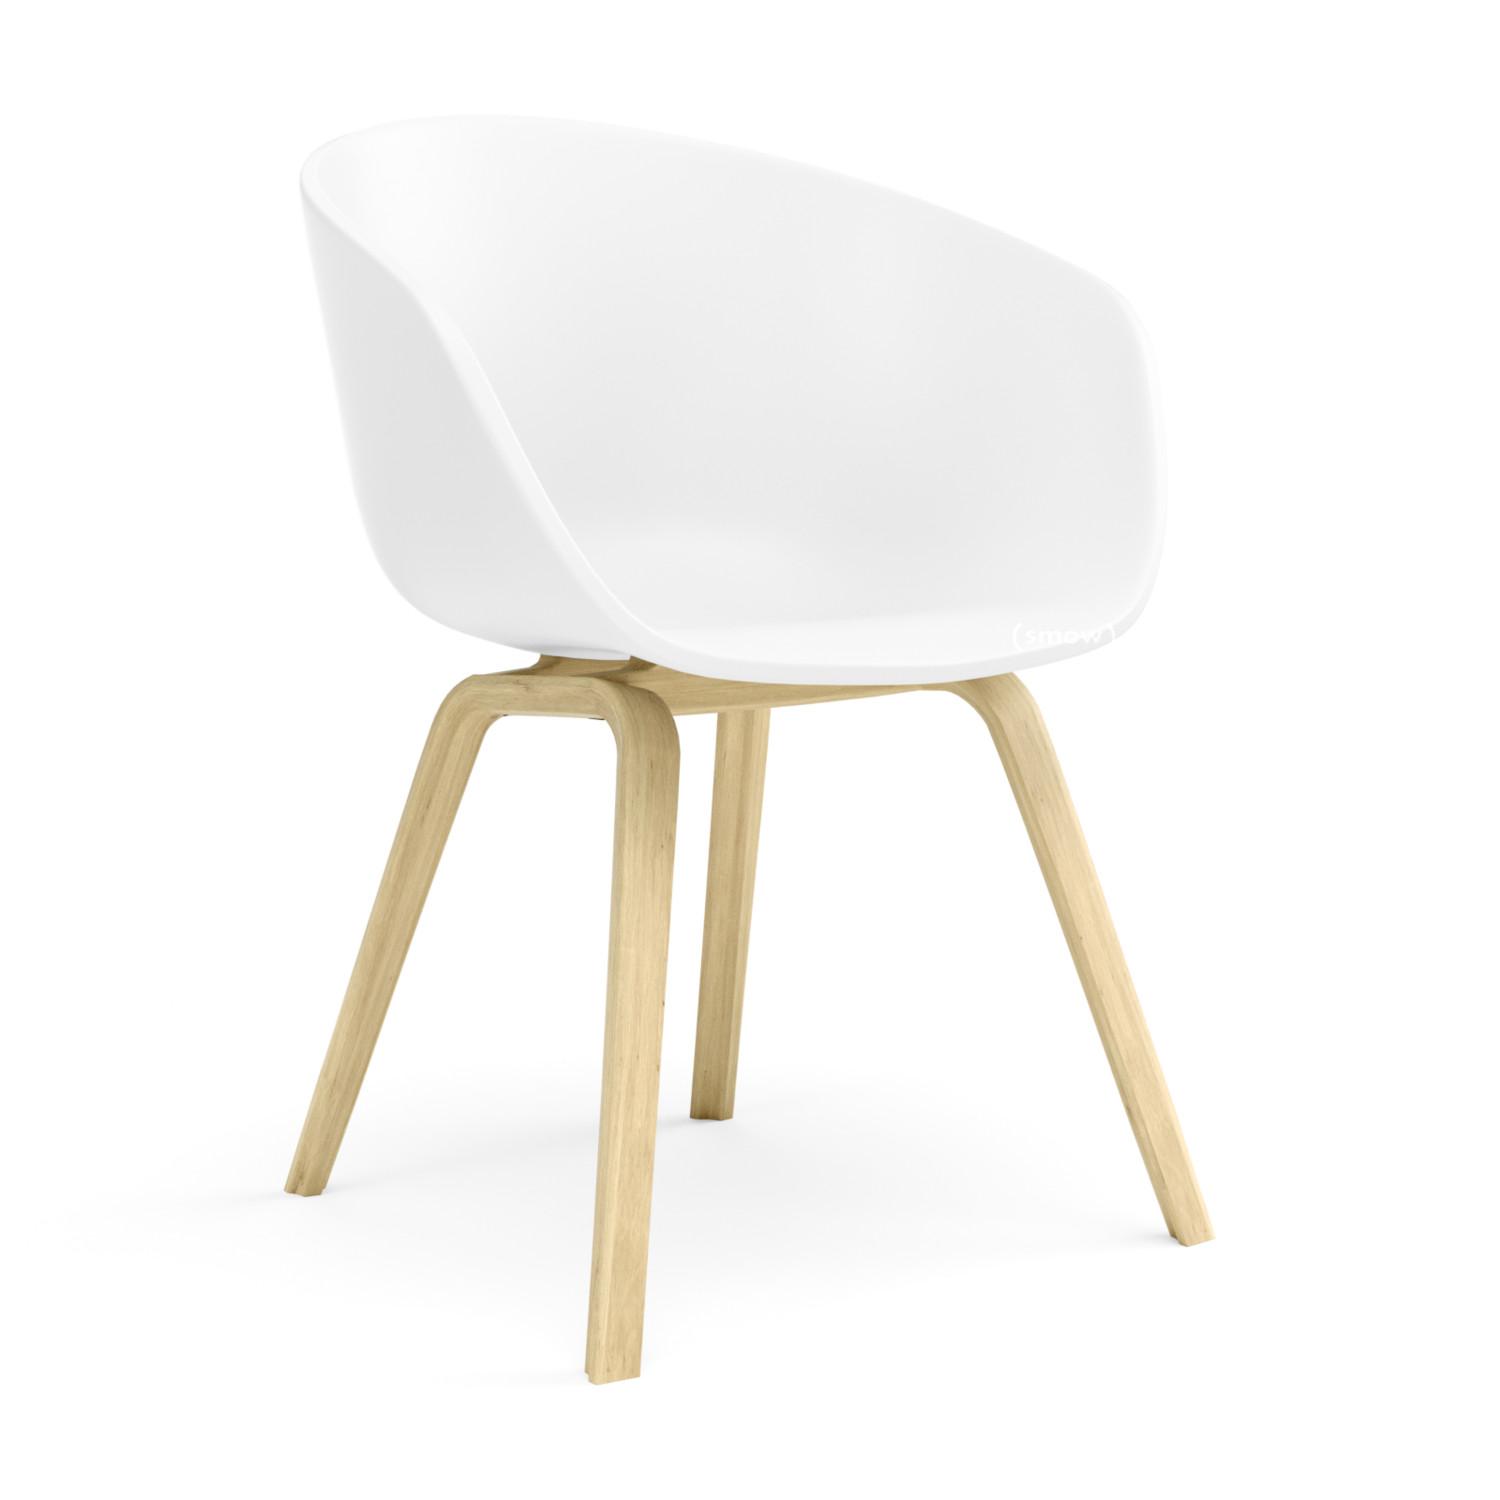 Hay About A Chair AAC 22, White, Soap oak by Welling & HAY, 2010 Designer furniture by